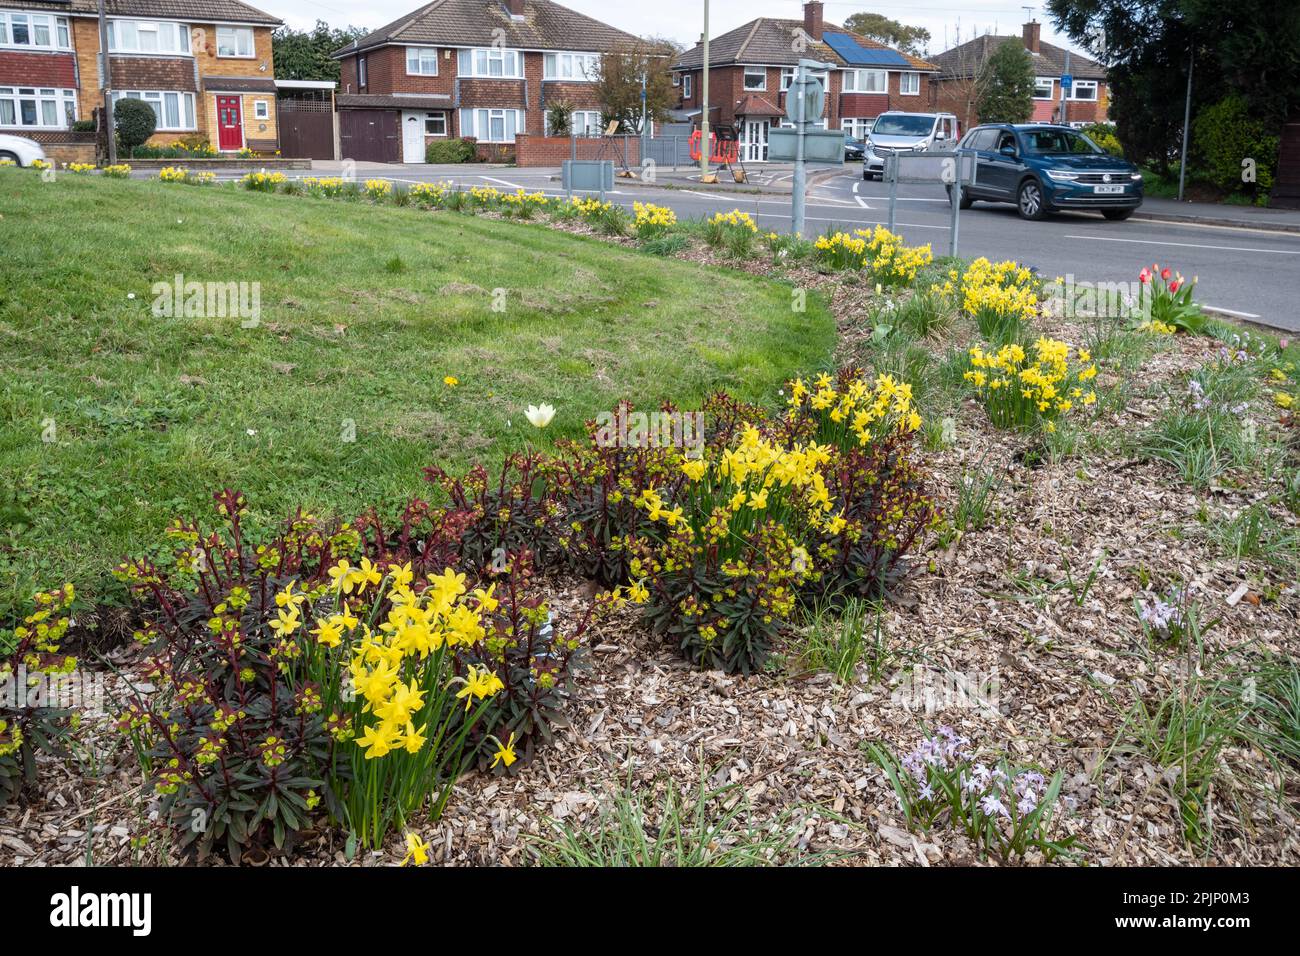 April 4th, 2023. Flowerbeds on roundabouts in Farnborough, Hampshire, UK, have been planted with bulbs and perennials this year by Rushmoor Borough Council instead of the usual annuals. In previous years, the flowers required a lot of watering. The new plants should be more cost-effective, and more sustainable since they require less water and will be better suited to the summer heatwaves and droughts that have become more frequent due to climate change. Stock Photo